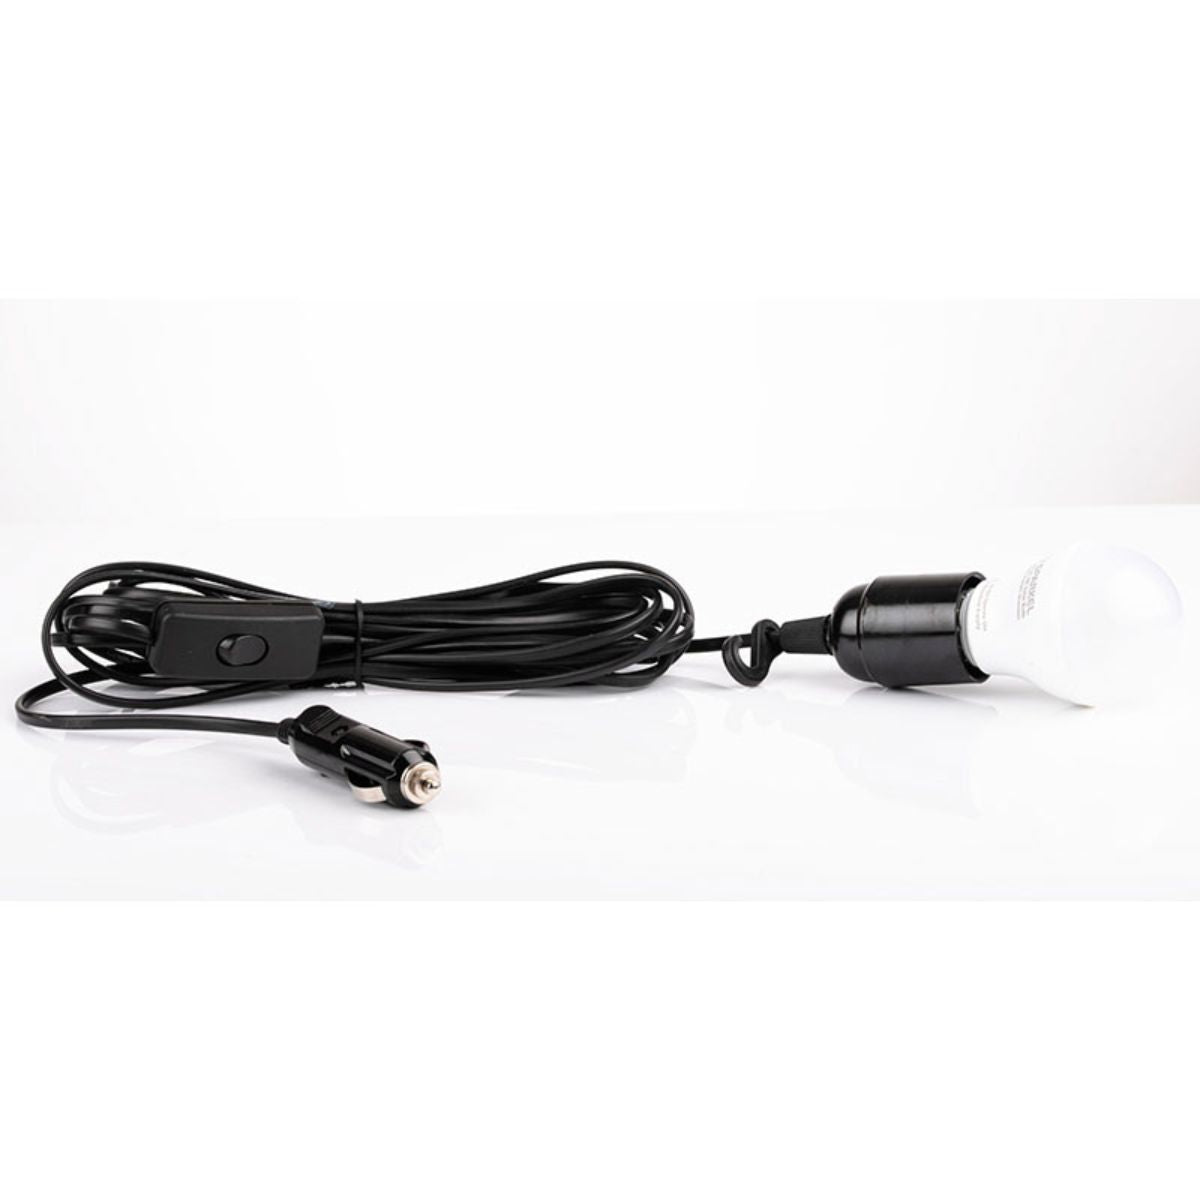 Extension Power Cord for Cigarette Lighter Male Plug with 9W 12V DC LED E27 Bulb 1